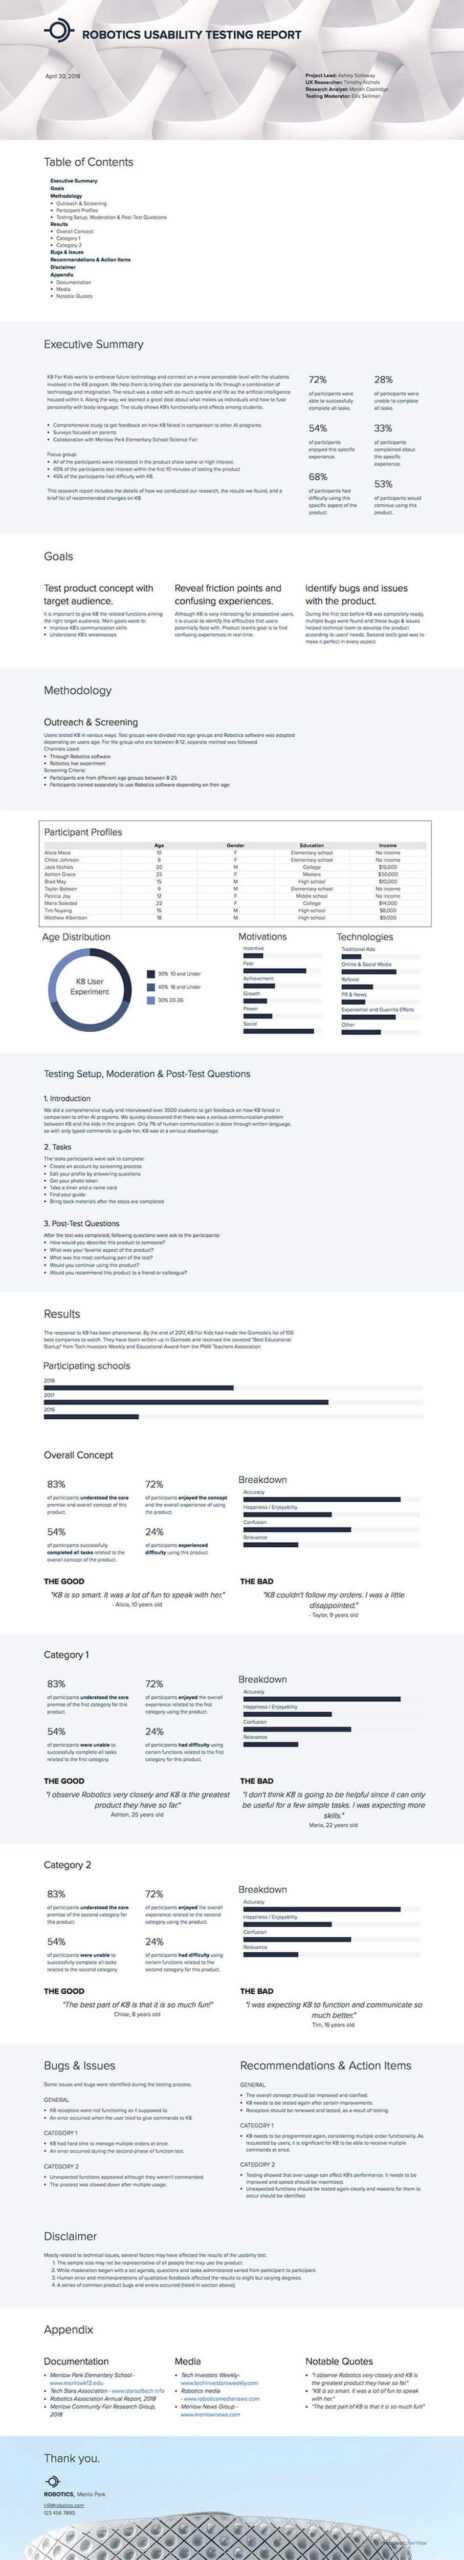 How To Write A Usability Testing Report (With Samples) | Xtensio Intended For Ux Report Template